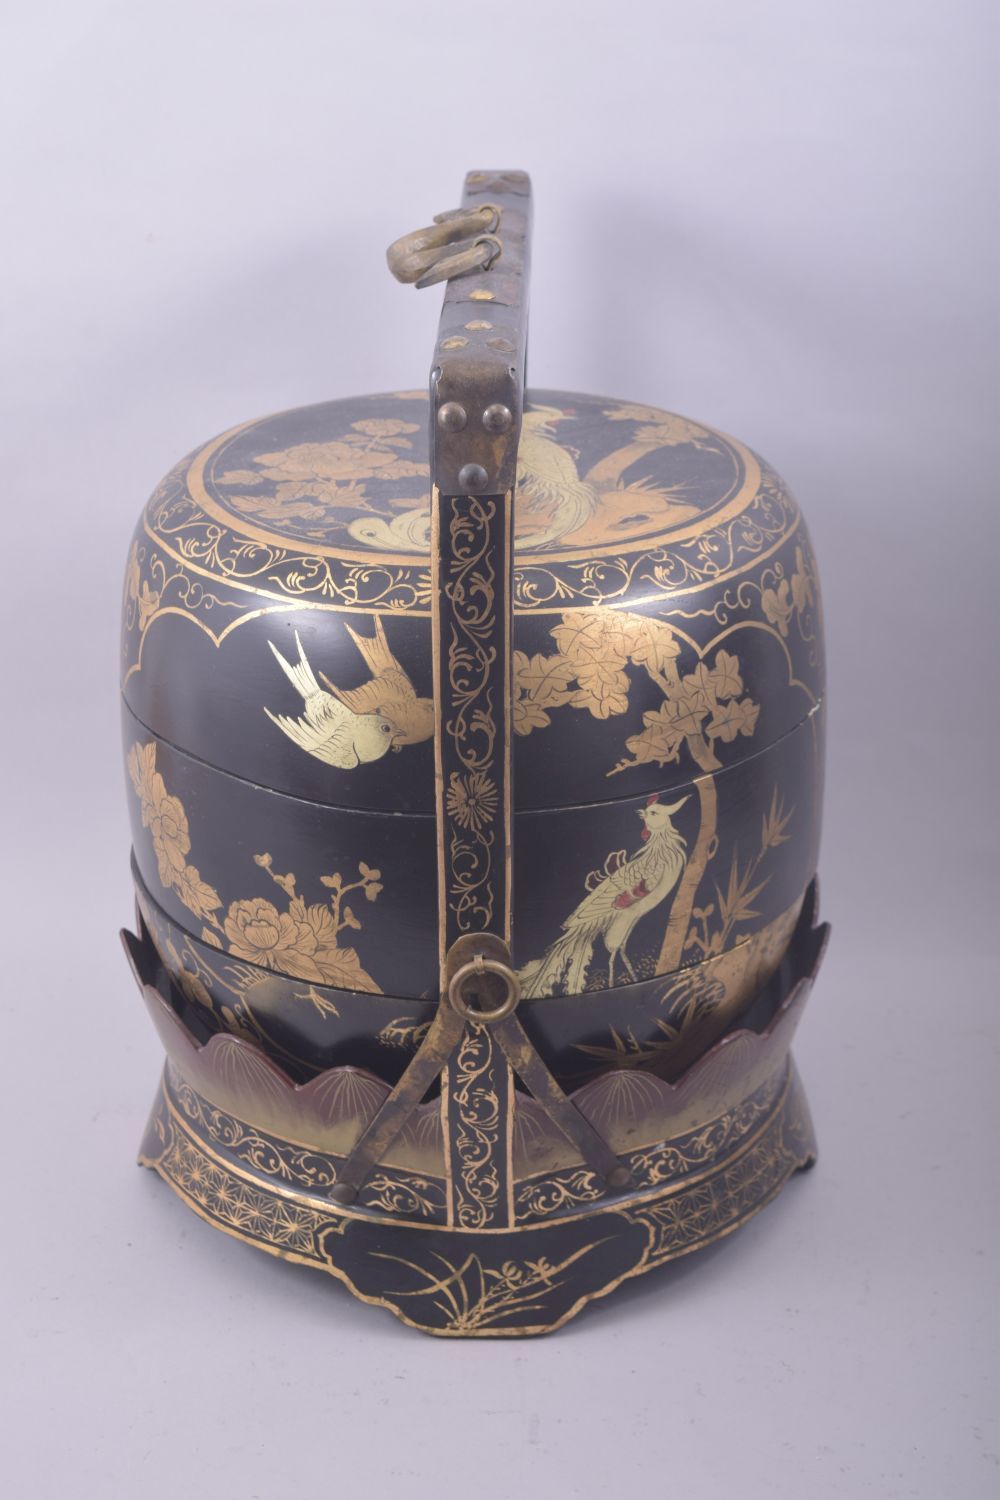 AN EARLY 20TH CENTURY LACQUERED WOOD JUBAKO / FOOD CARRIER, in black and gilt lacquer and - Image 2 of 8